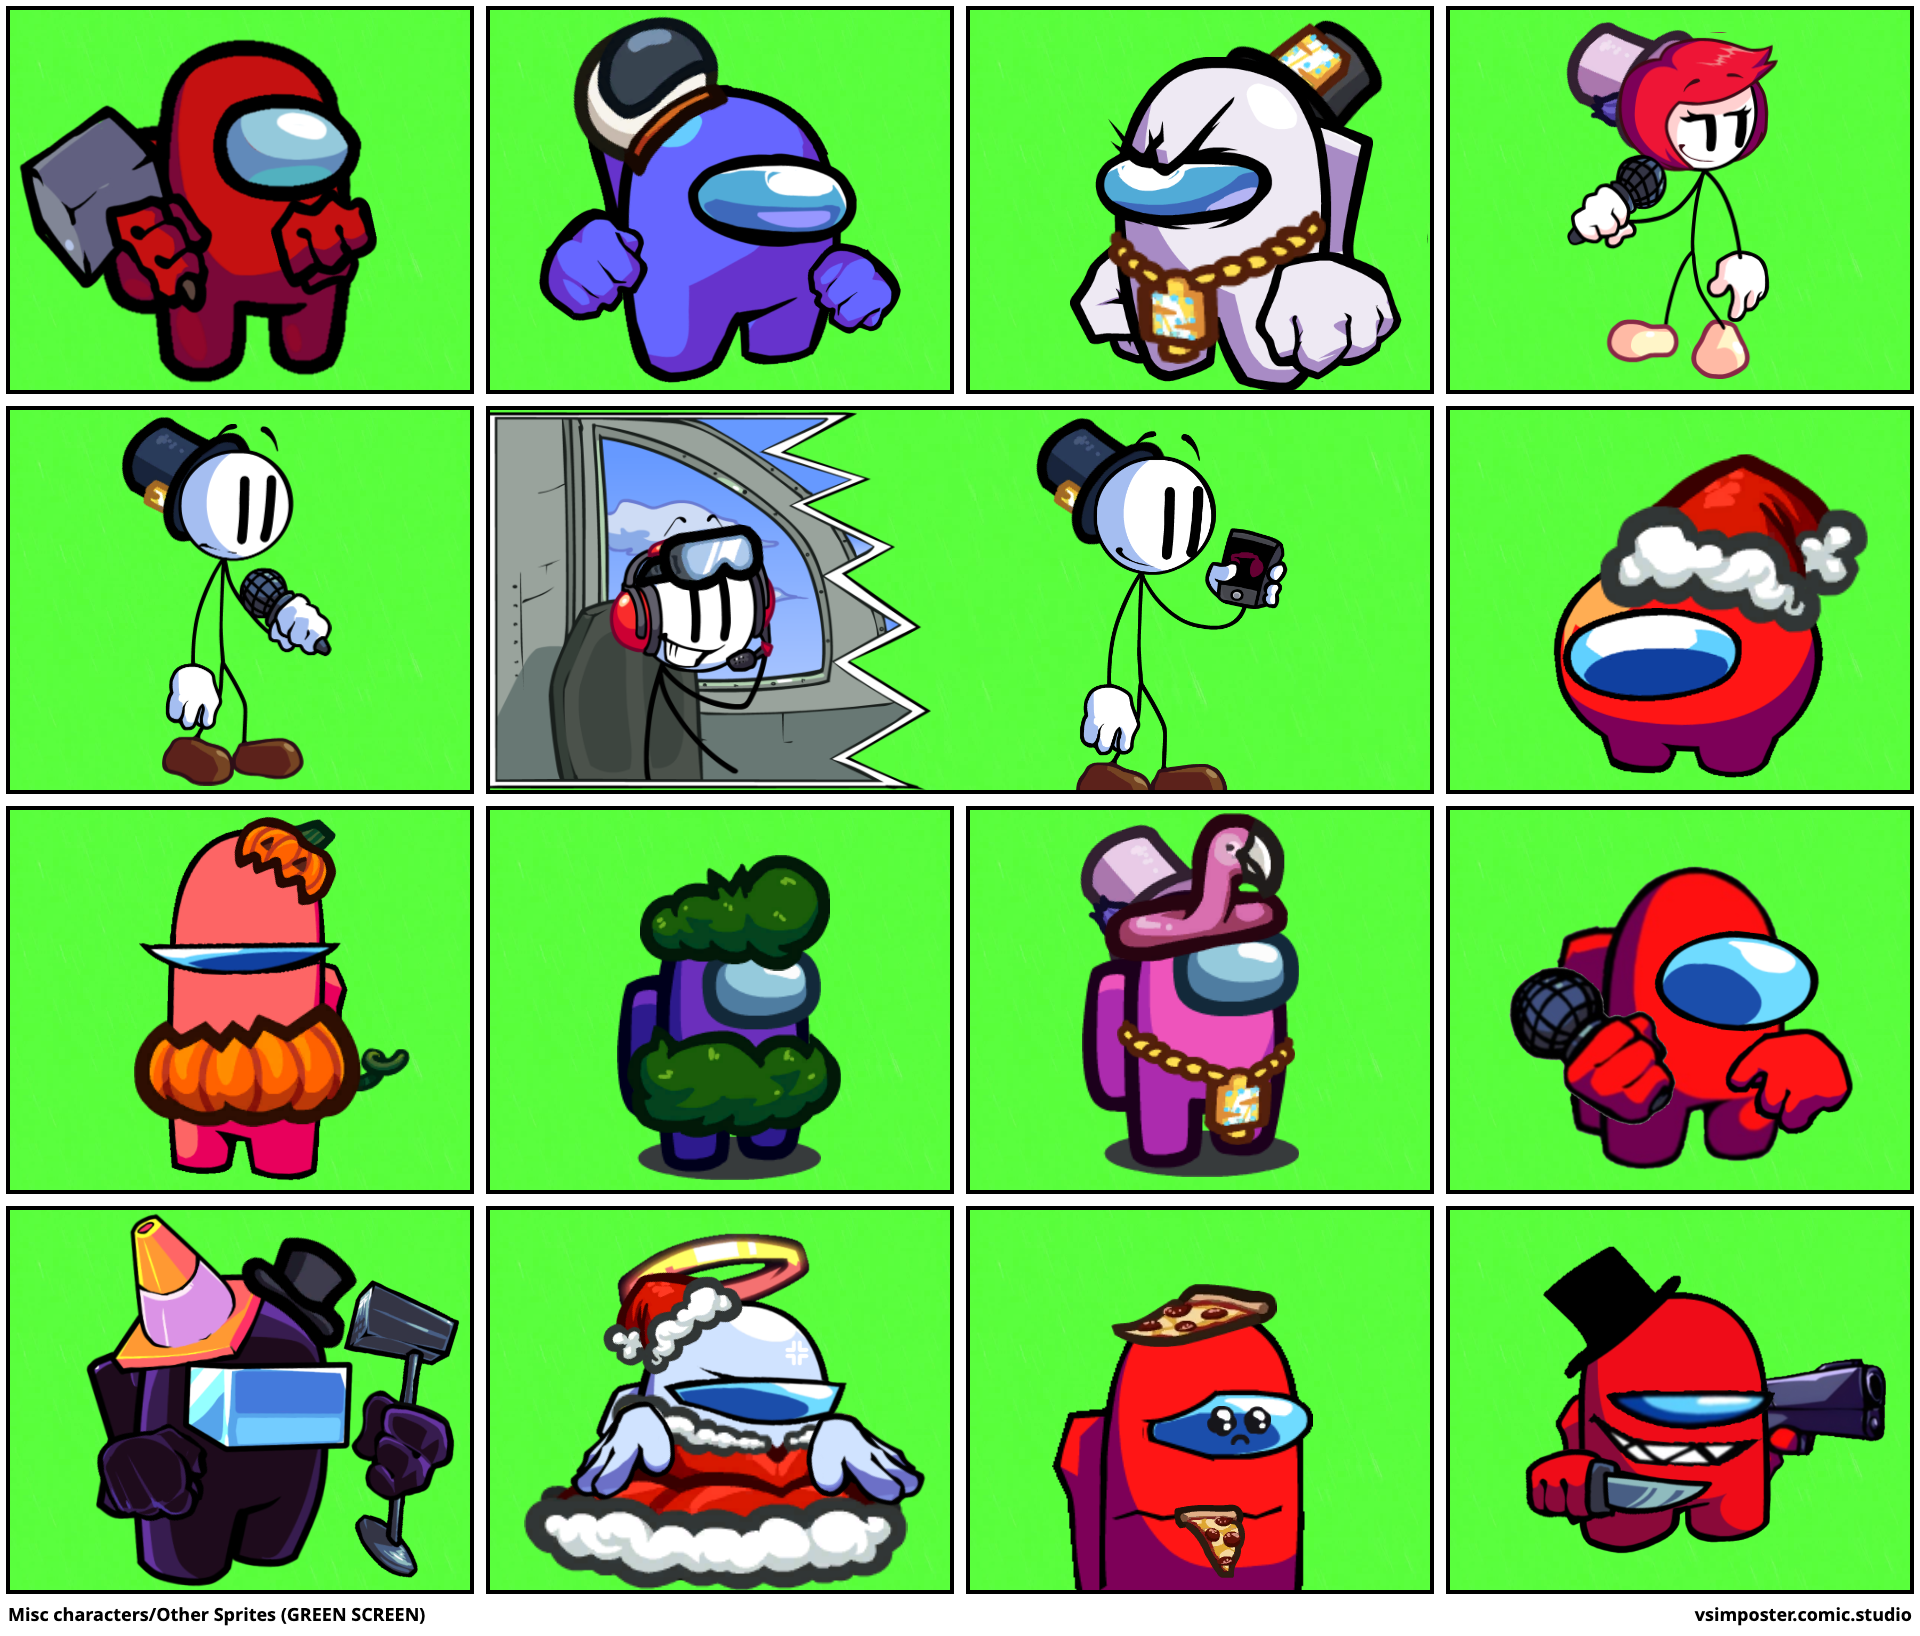 Misc characters/Other Sprites (GREEN SCREEN)